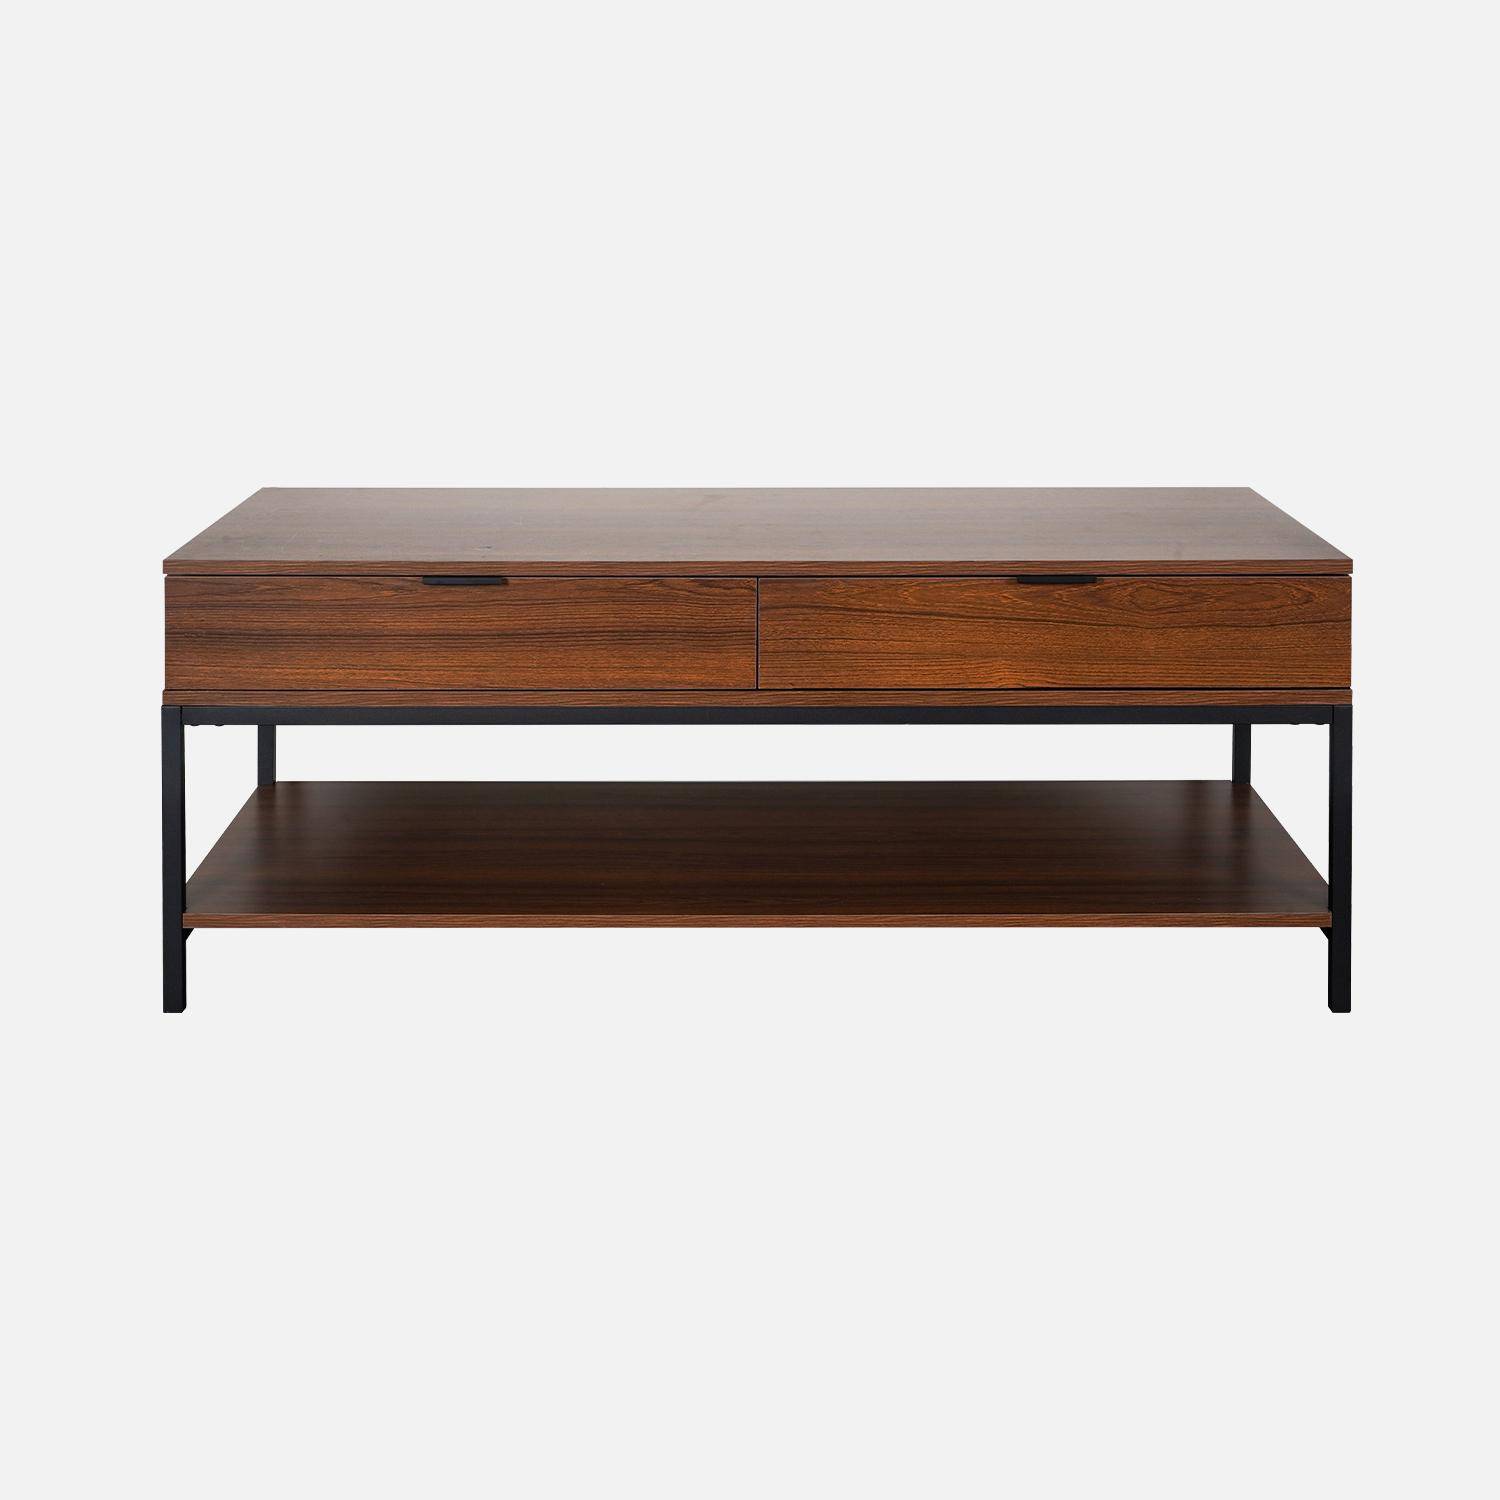 Walnut-coloured coffee table with black metal legs and handle - 2 drawers and 1 shelf,sweeek,Photo5